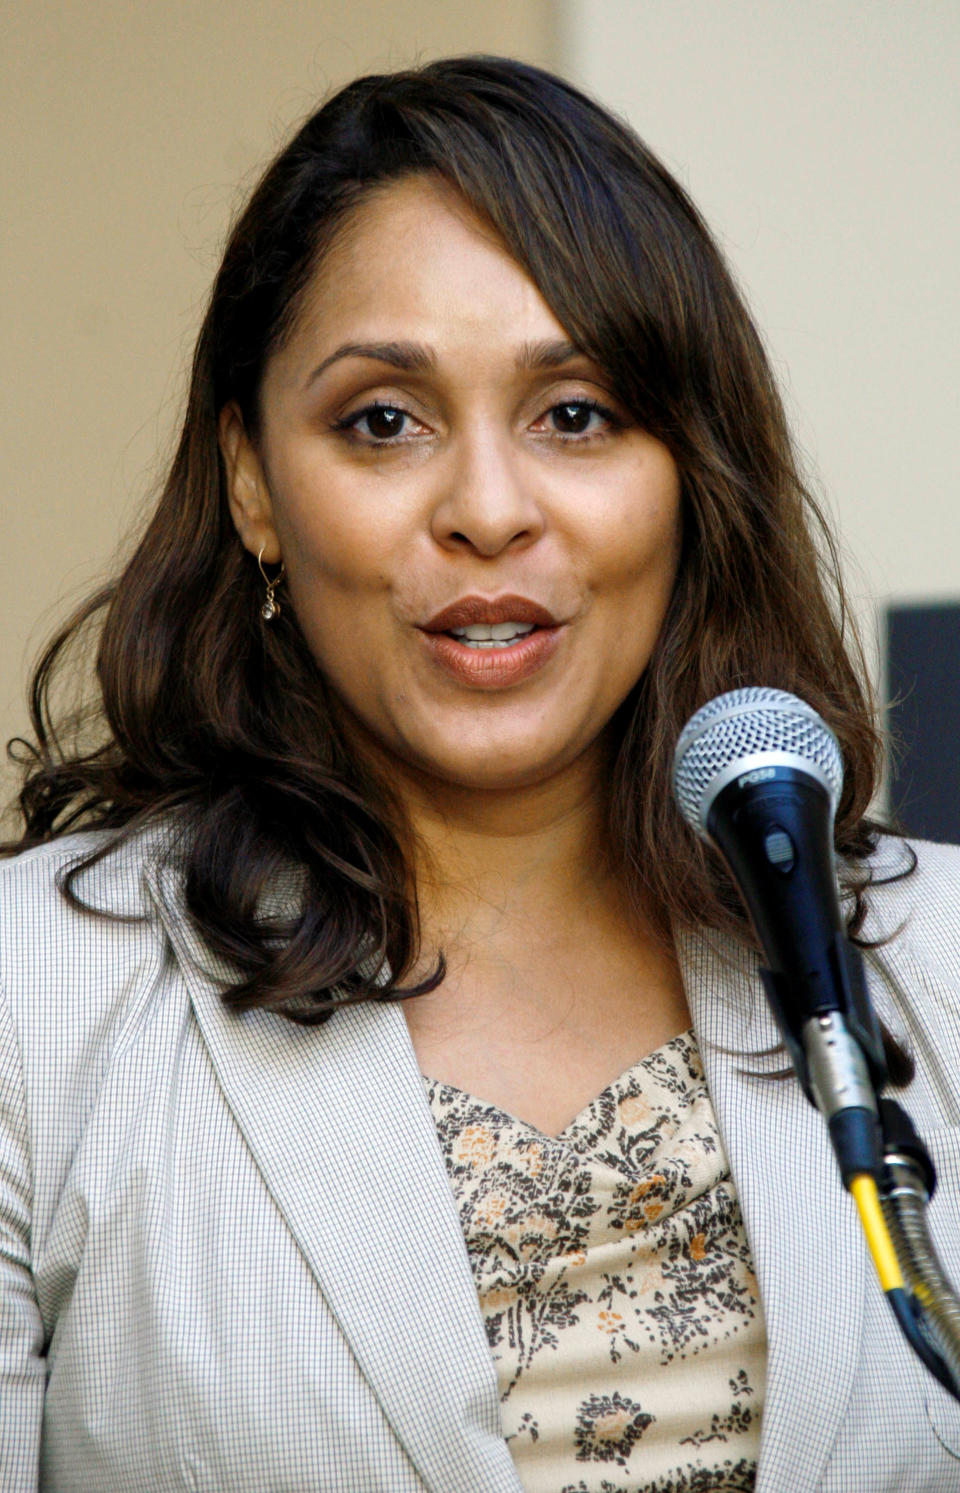 FILE - This Oct. 10, 2007 file photo shows Pulitzer Prize winning author Natasha Trethewey recites a poem at Delta State University in Cleveland, Miss. Trethewey, the nation's new poet laureate, is working on a memoir, currently untitled, that has been acquired by Ecco. The publisher, an imprint of HarperCollins, announced Monday, July 2, 2012, that the book is scheduled to come out in 2014. (AP Photo/Rogelio V. Solis, file)